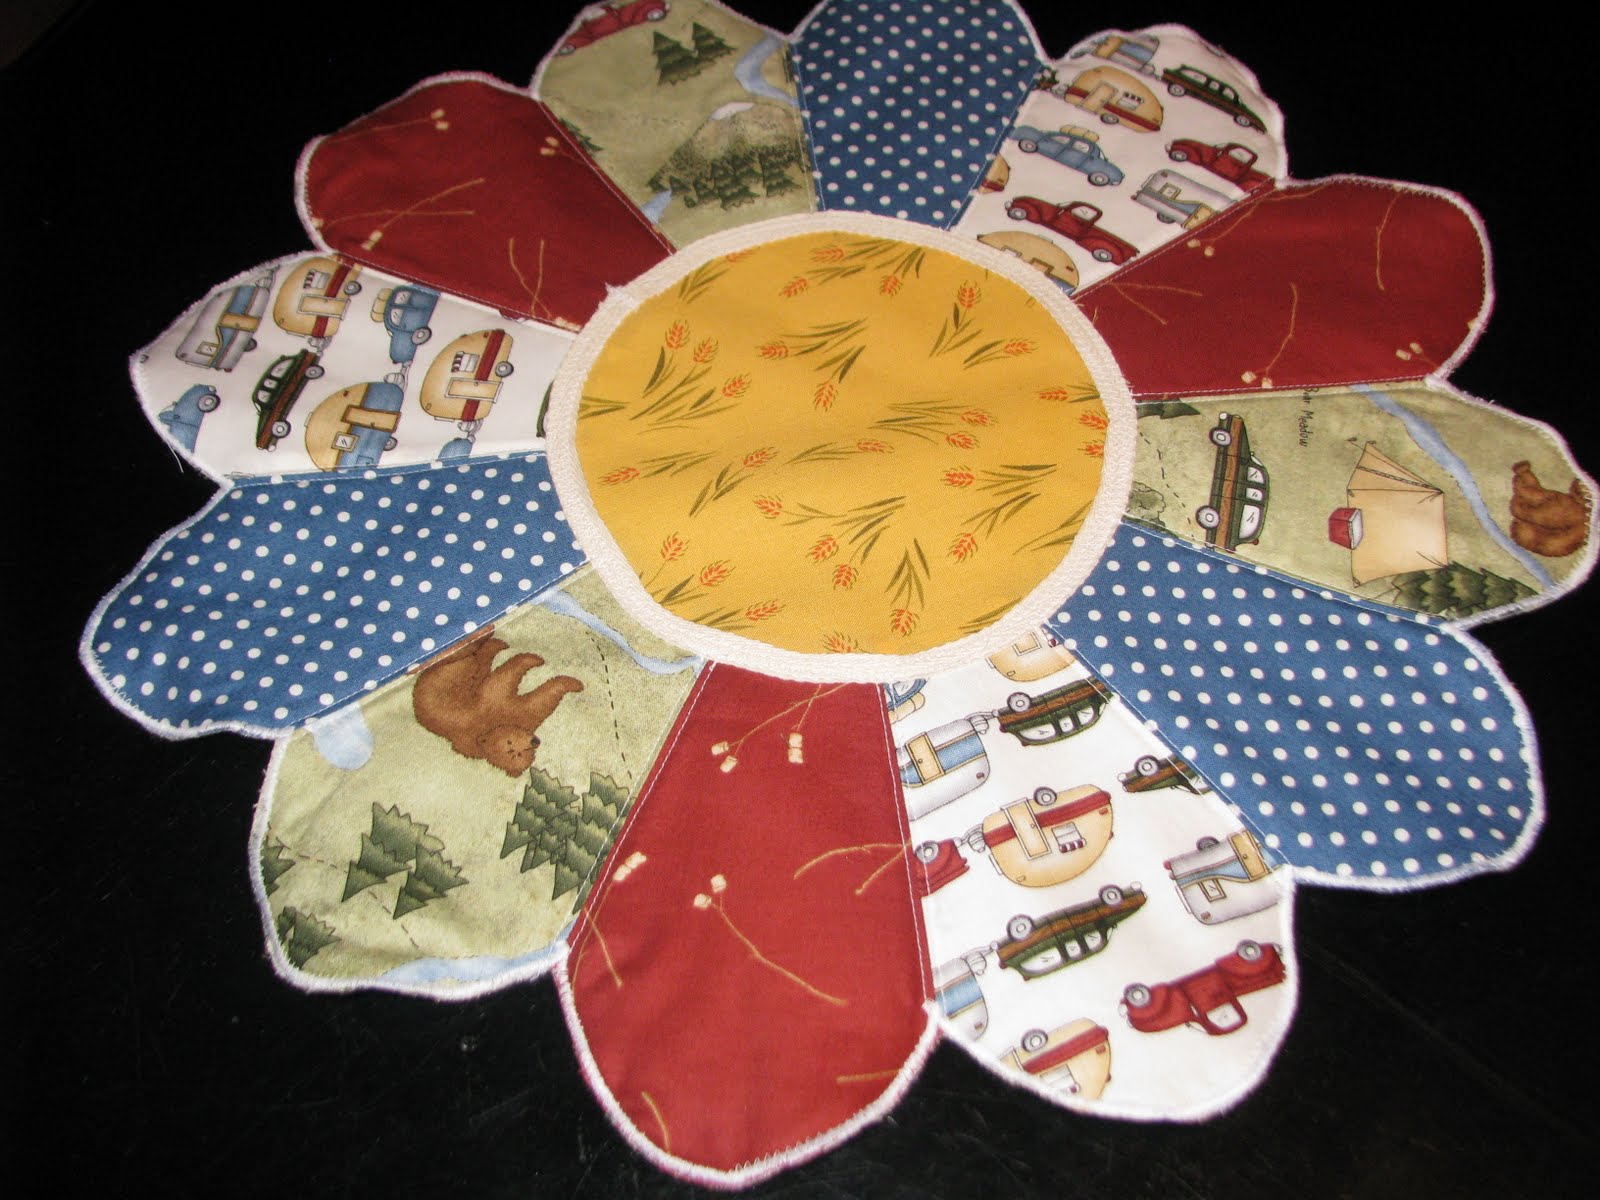 nanny-s-place-birthday-placemats-complete